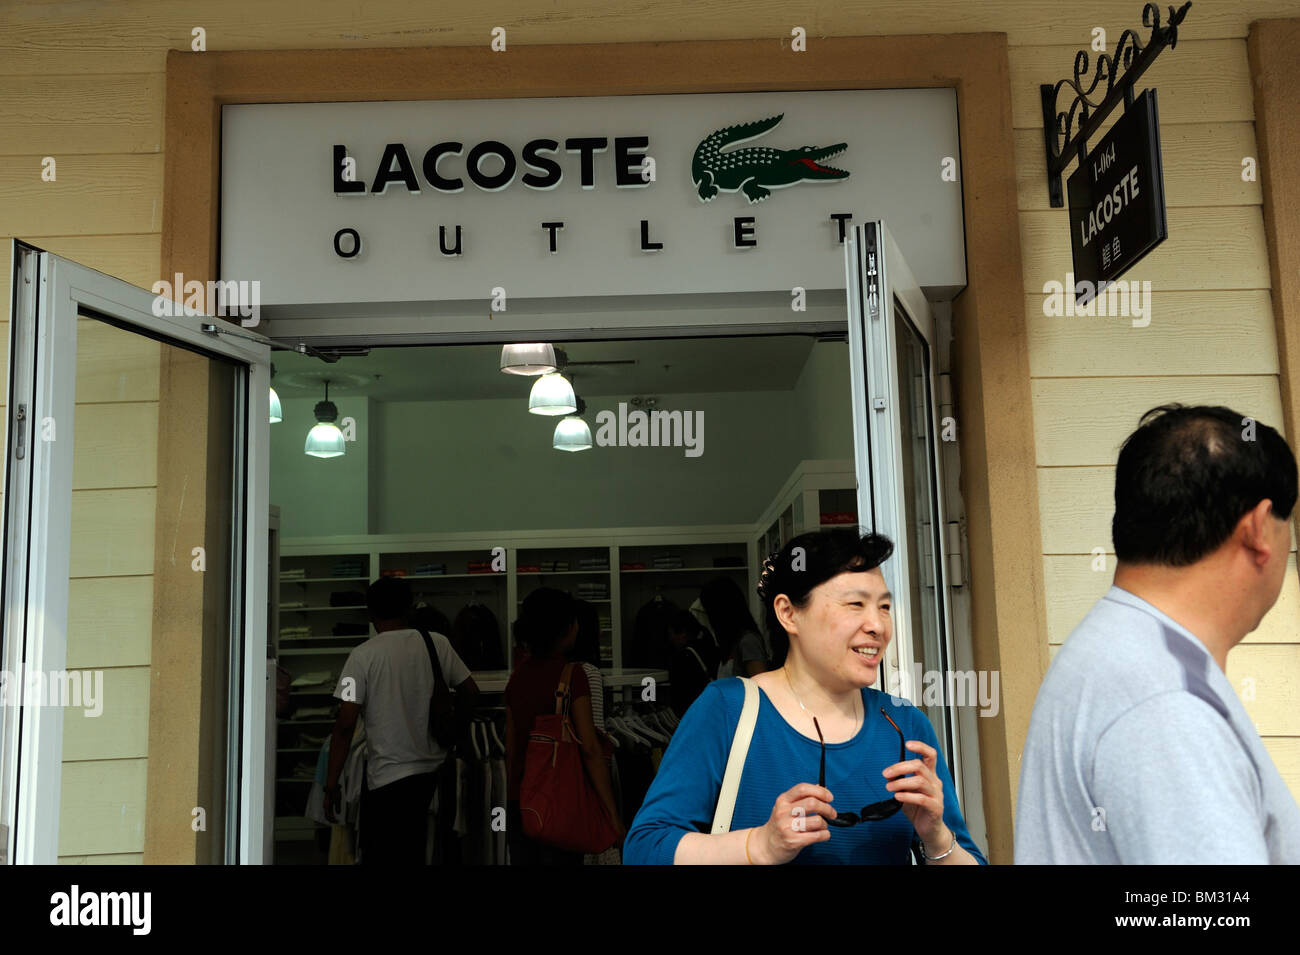 izod lacoste outlet store